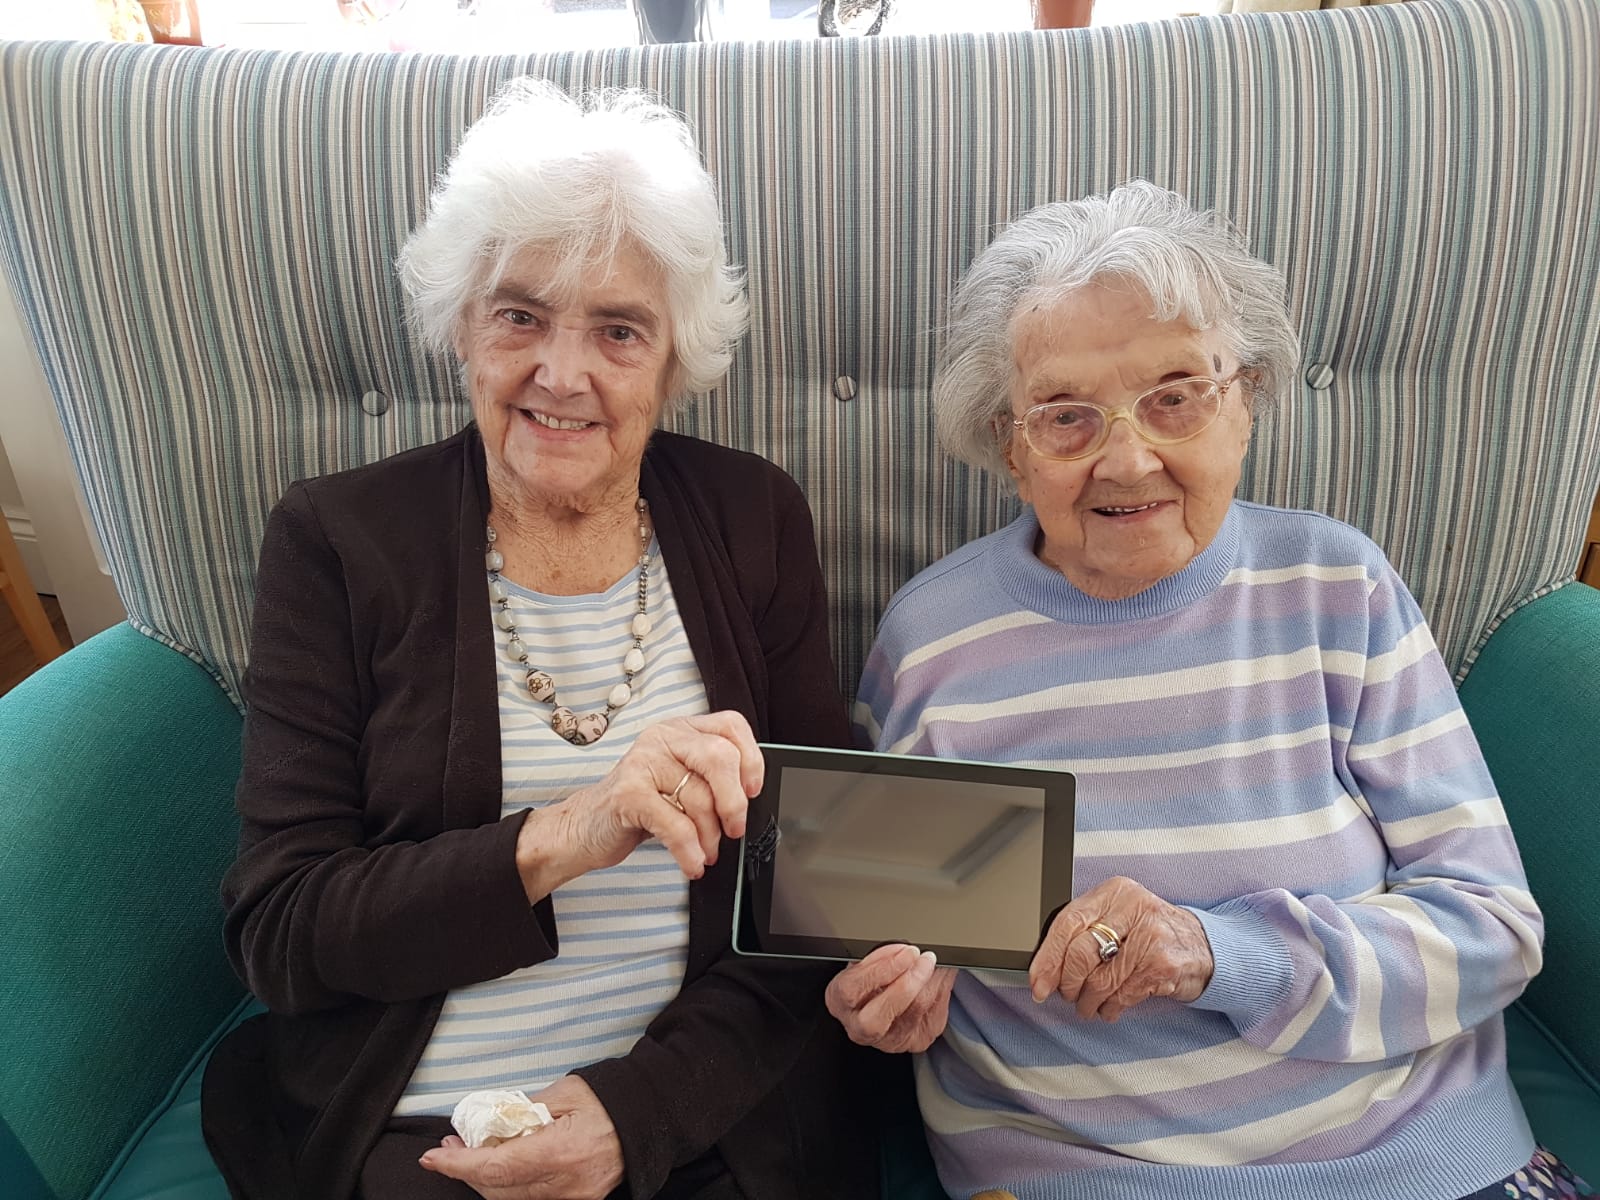 Two residents from Sandford Care Home with an iPad